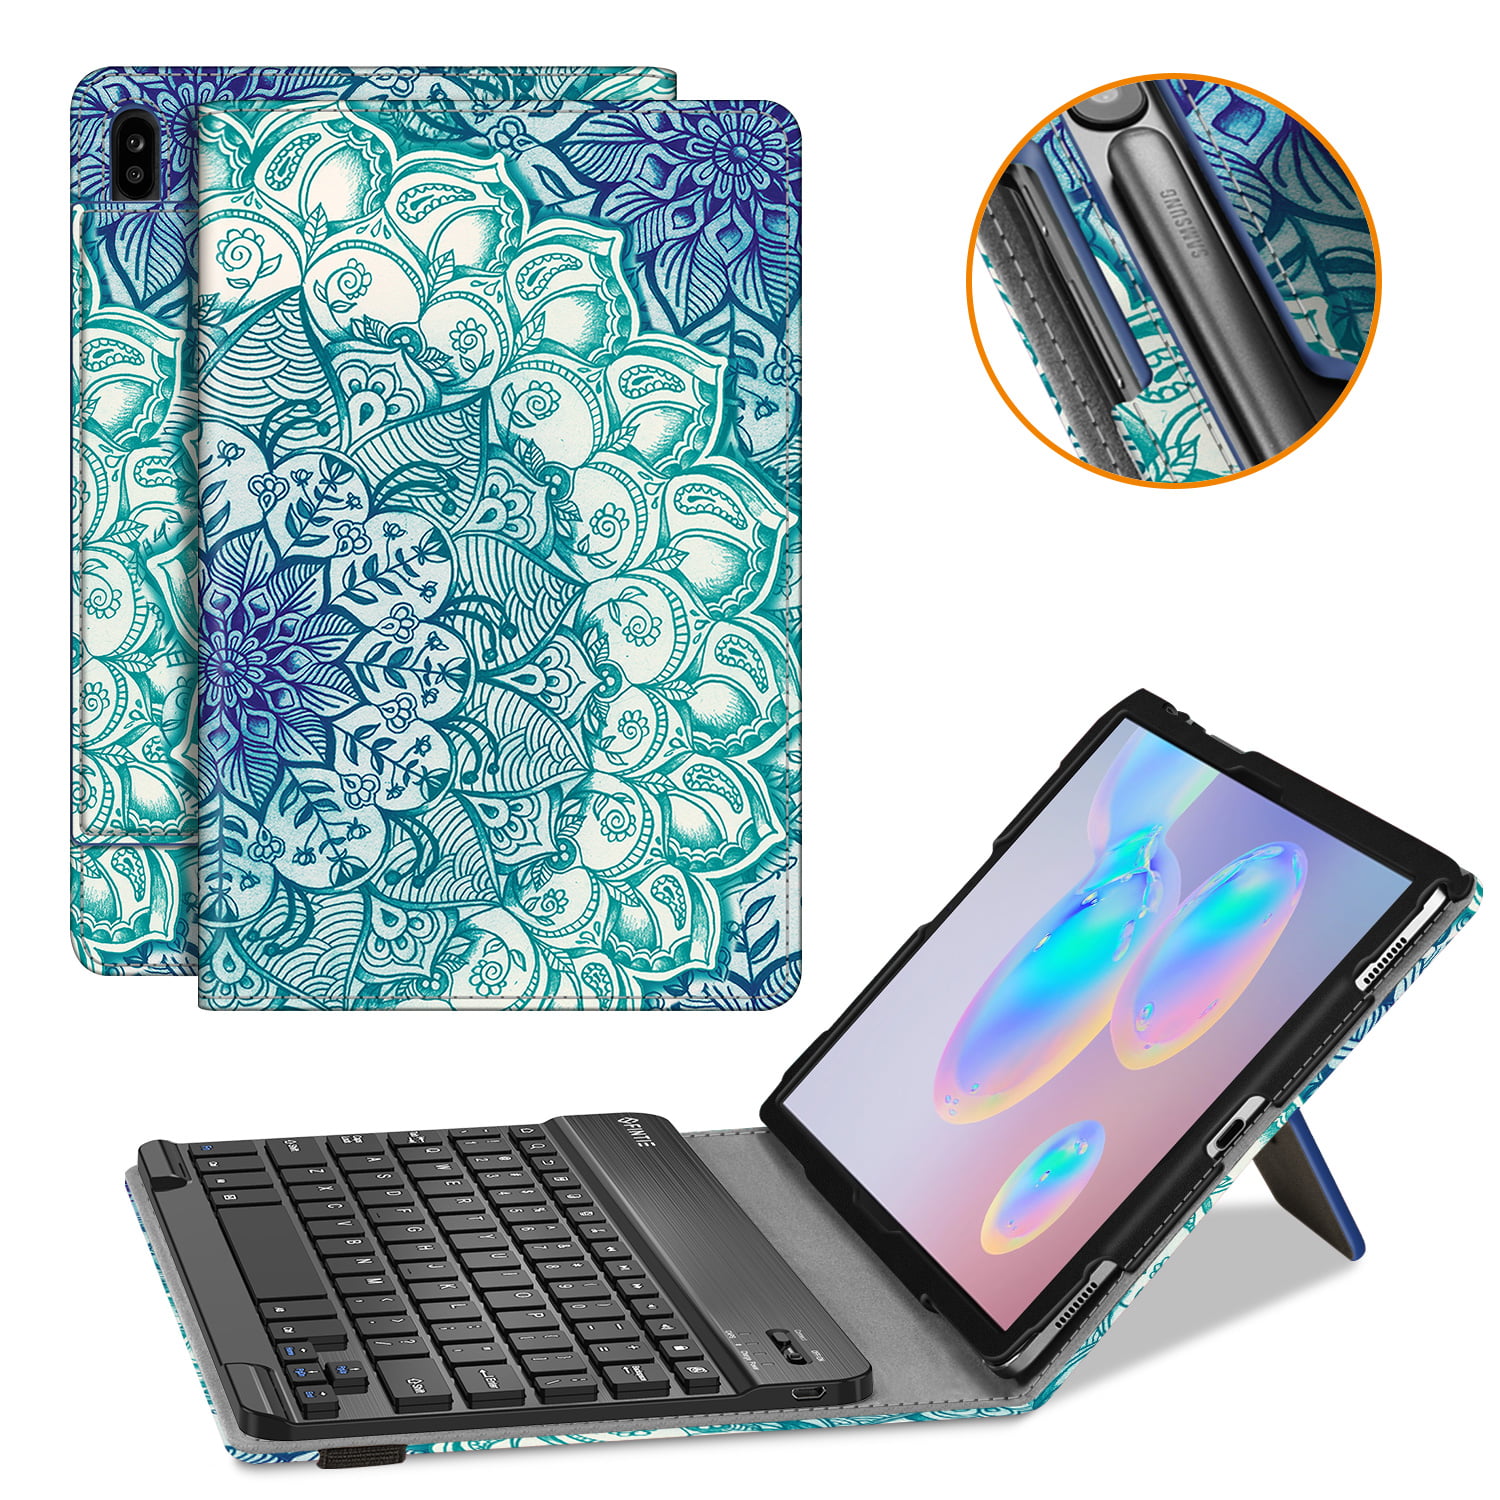 Model SM-T860/T865/T867 , Black Folio Stand Cover with Removable Wireless Bluetooth Keyboard Patented S Pen Slot Design Fintie Keyboard Case for Samsung Galaxy Tab S6 10.5 2019 